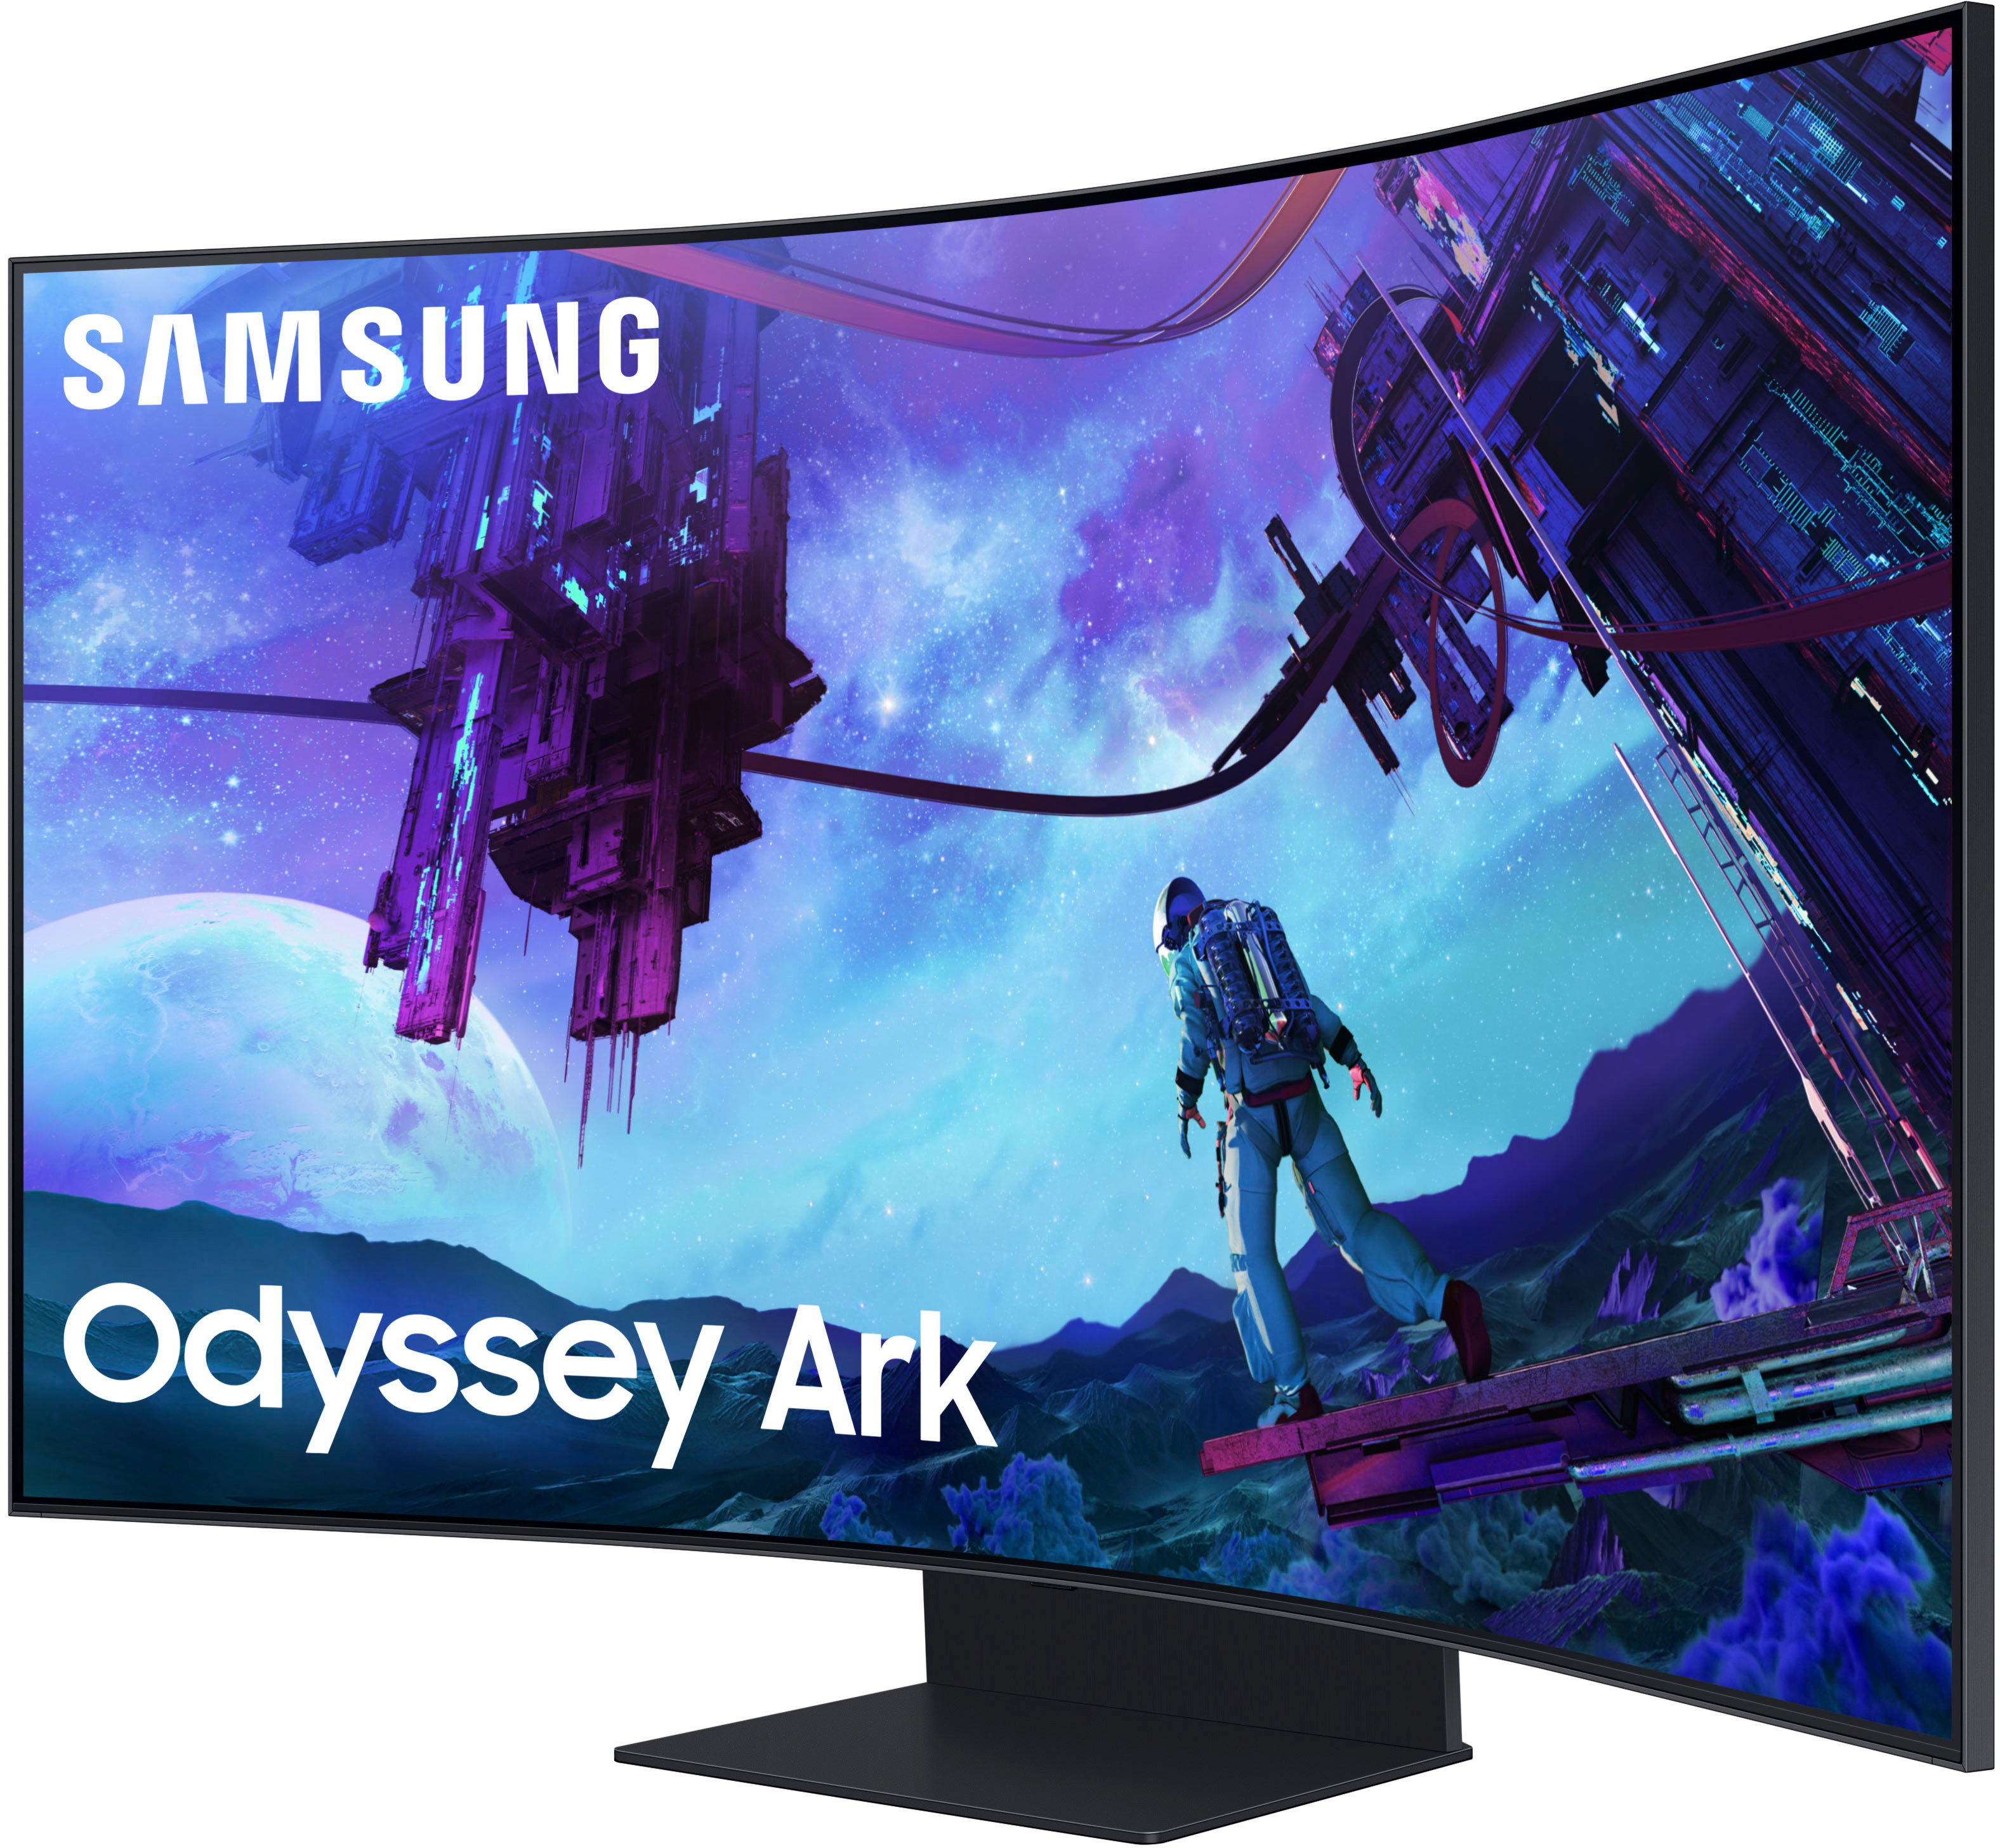 Samsung Odyssey Ark review: curved and cursed - The Verge